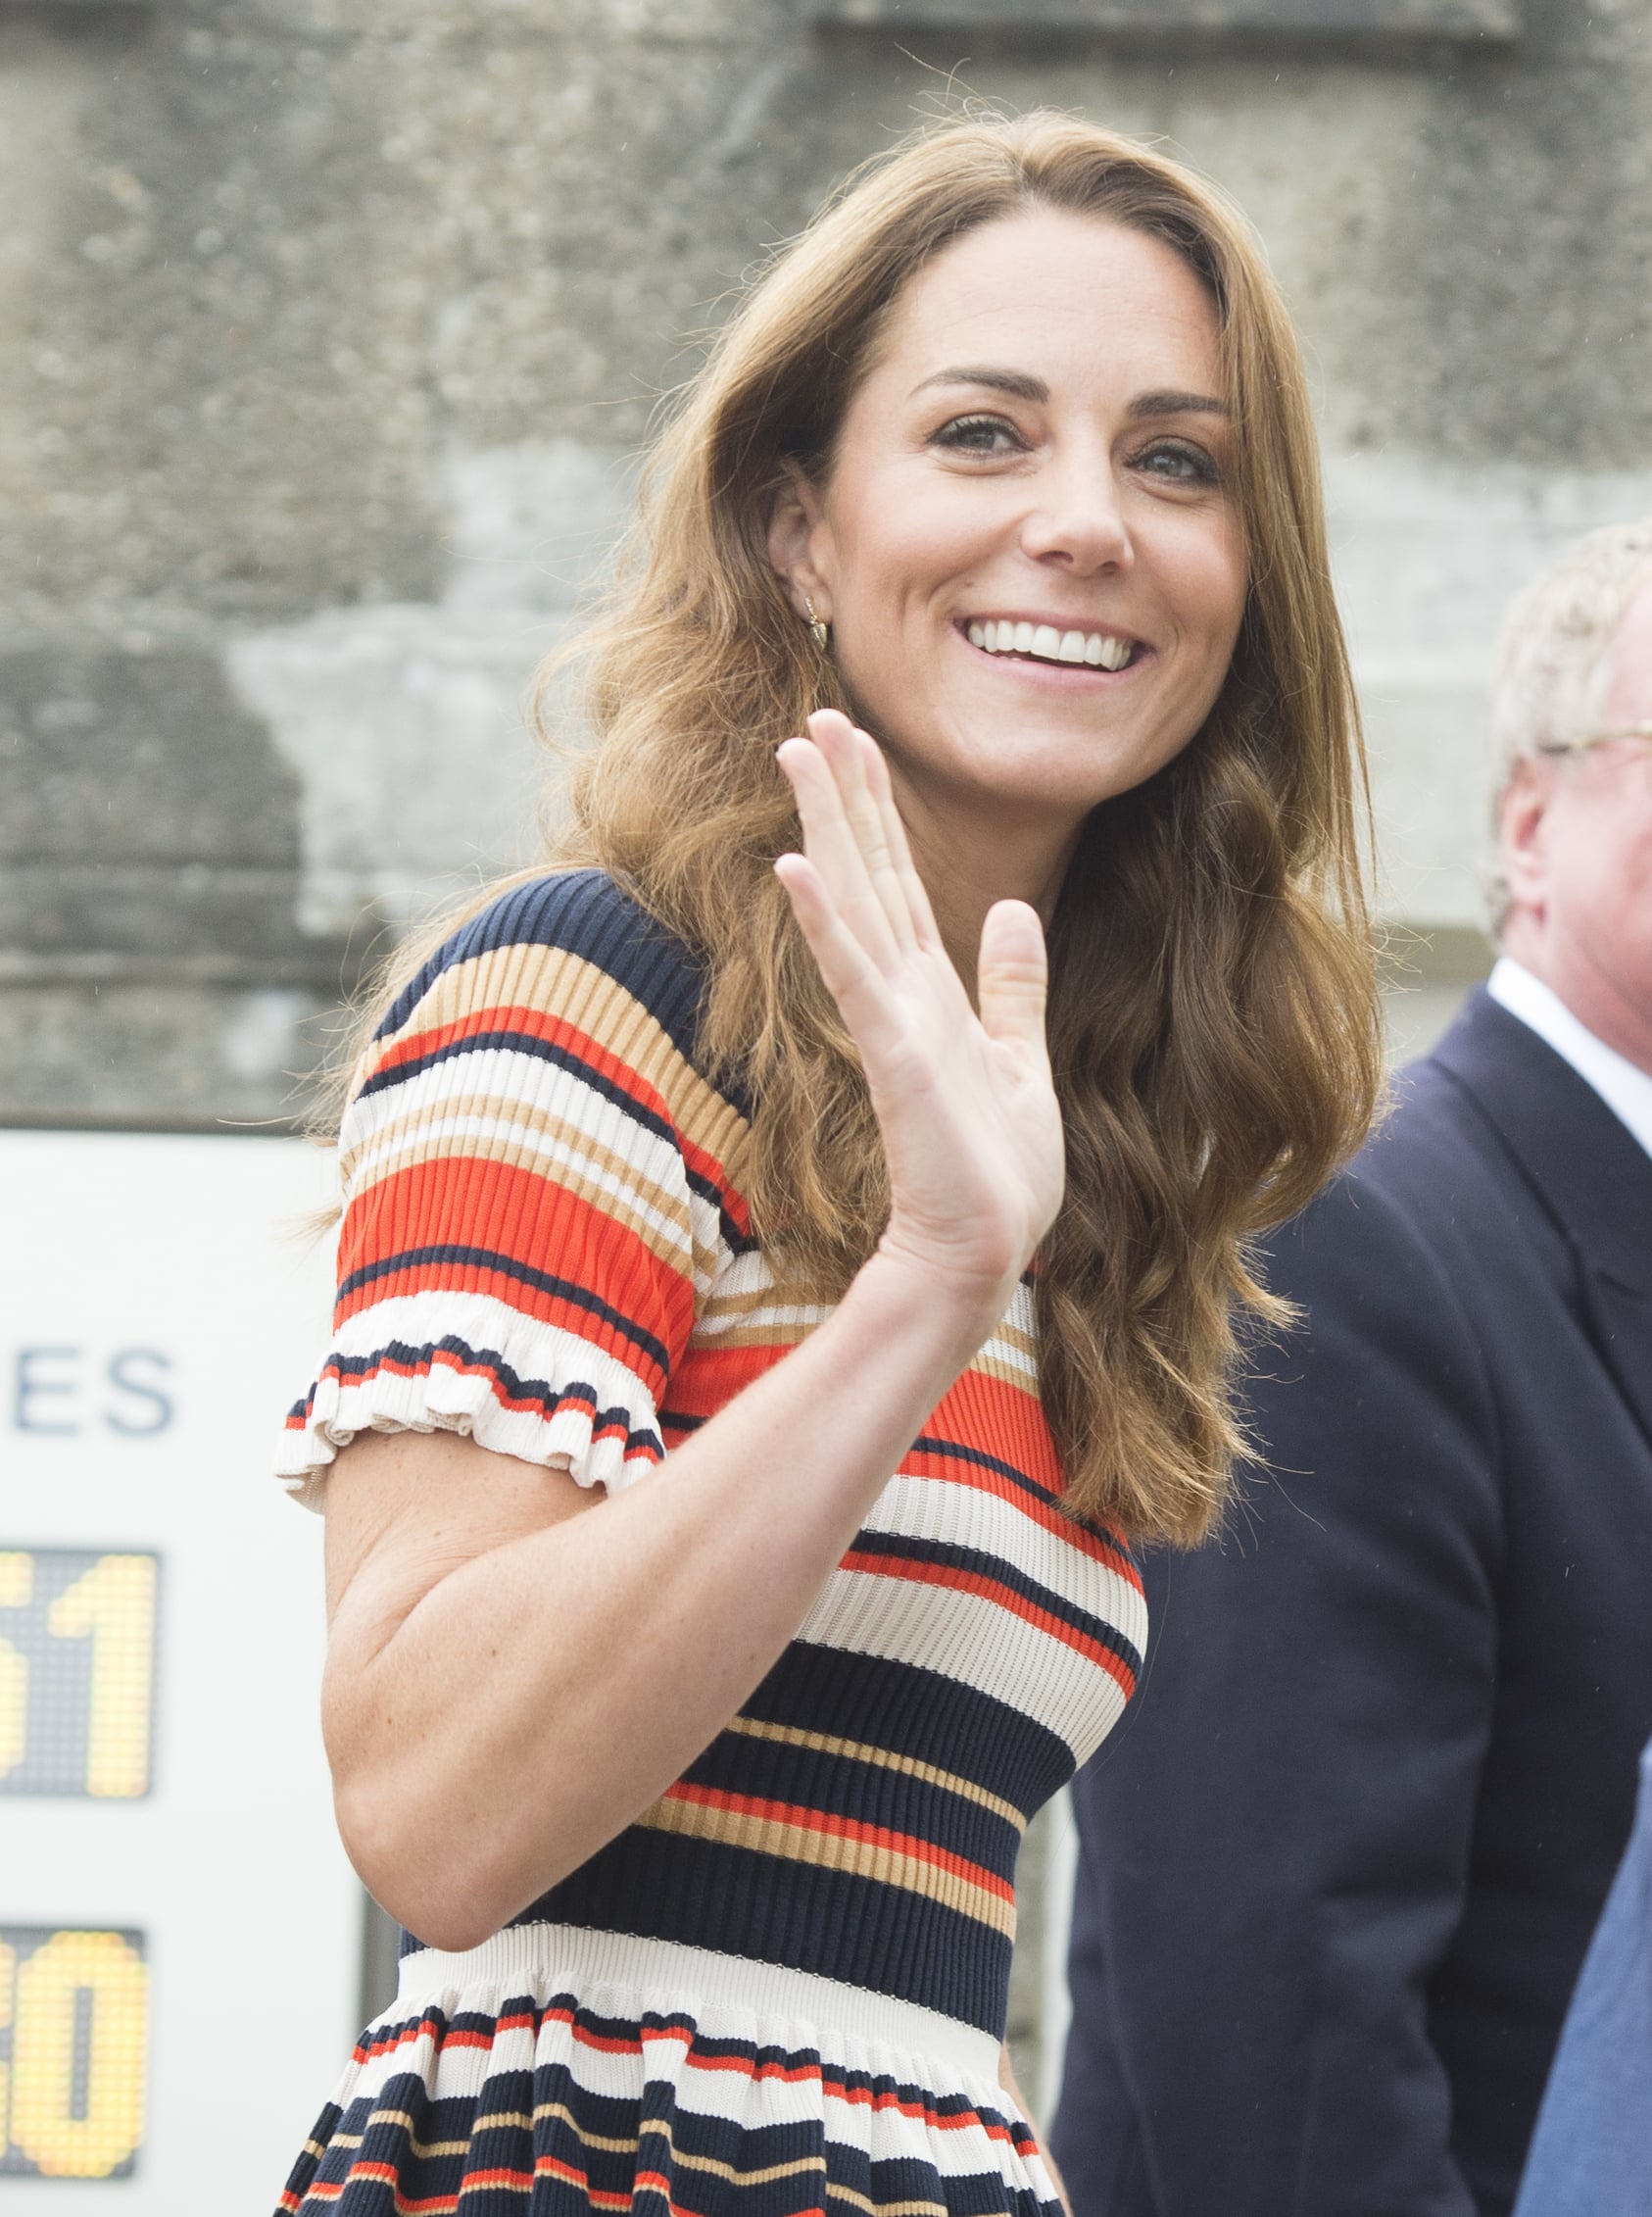 Kate Middleton Wore New Balance Sneakers At King's Cup Regatta